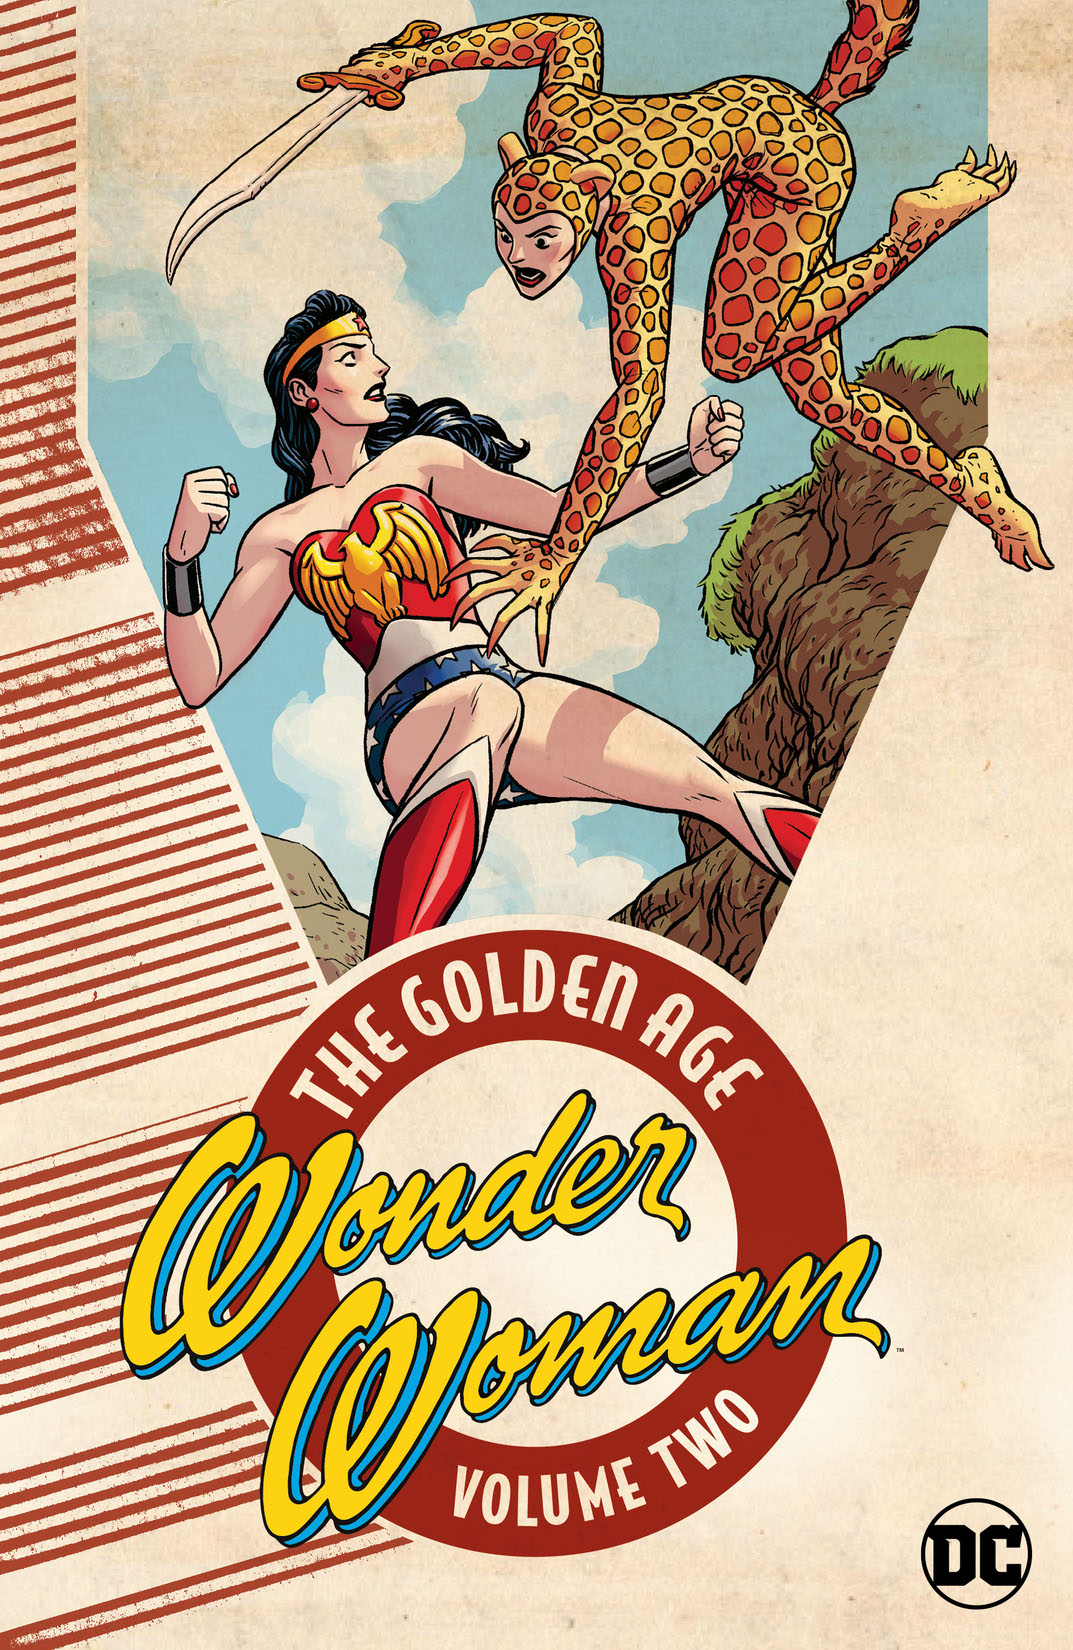 Wonder Woman: The Golden Age Vol. 2 preview images